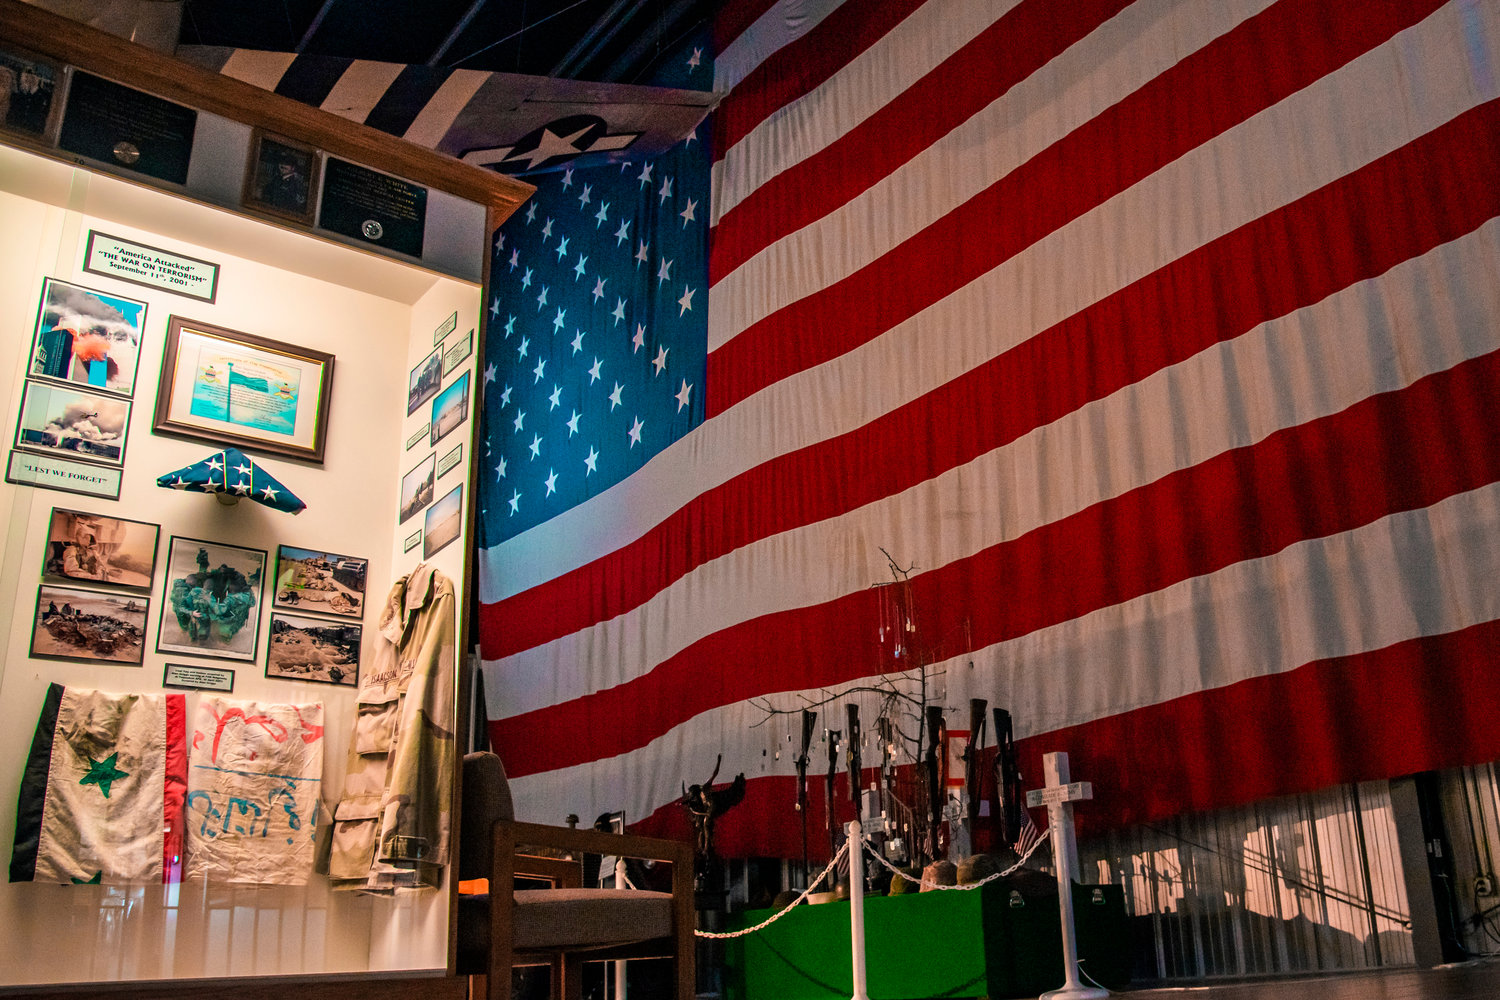 A display case that highlights details of September 11, 2001 is illuminated inside the Veterans Memorial Museum Thursday afternoon in Chehalis as an American Flag sets the backdrop.